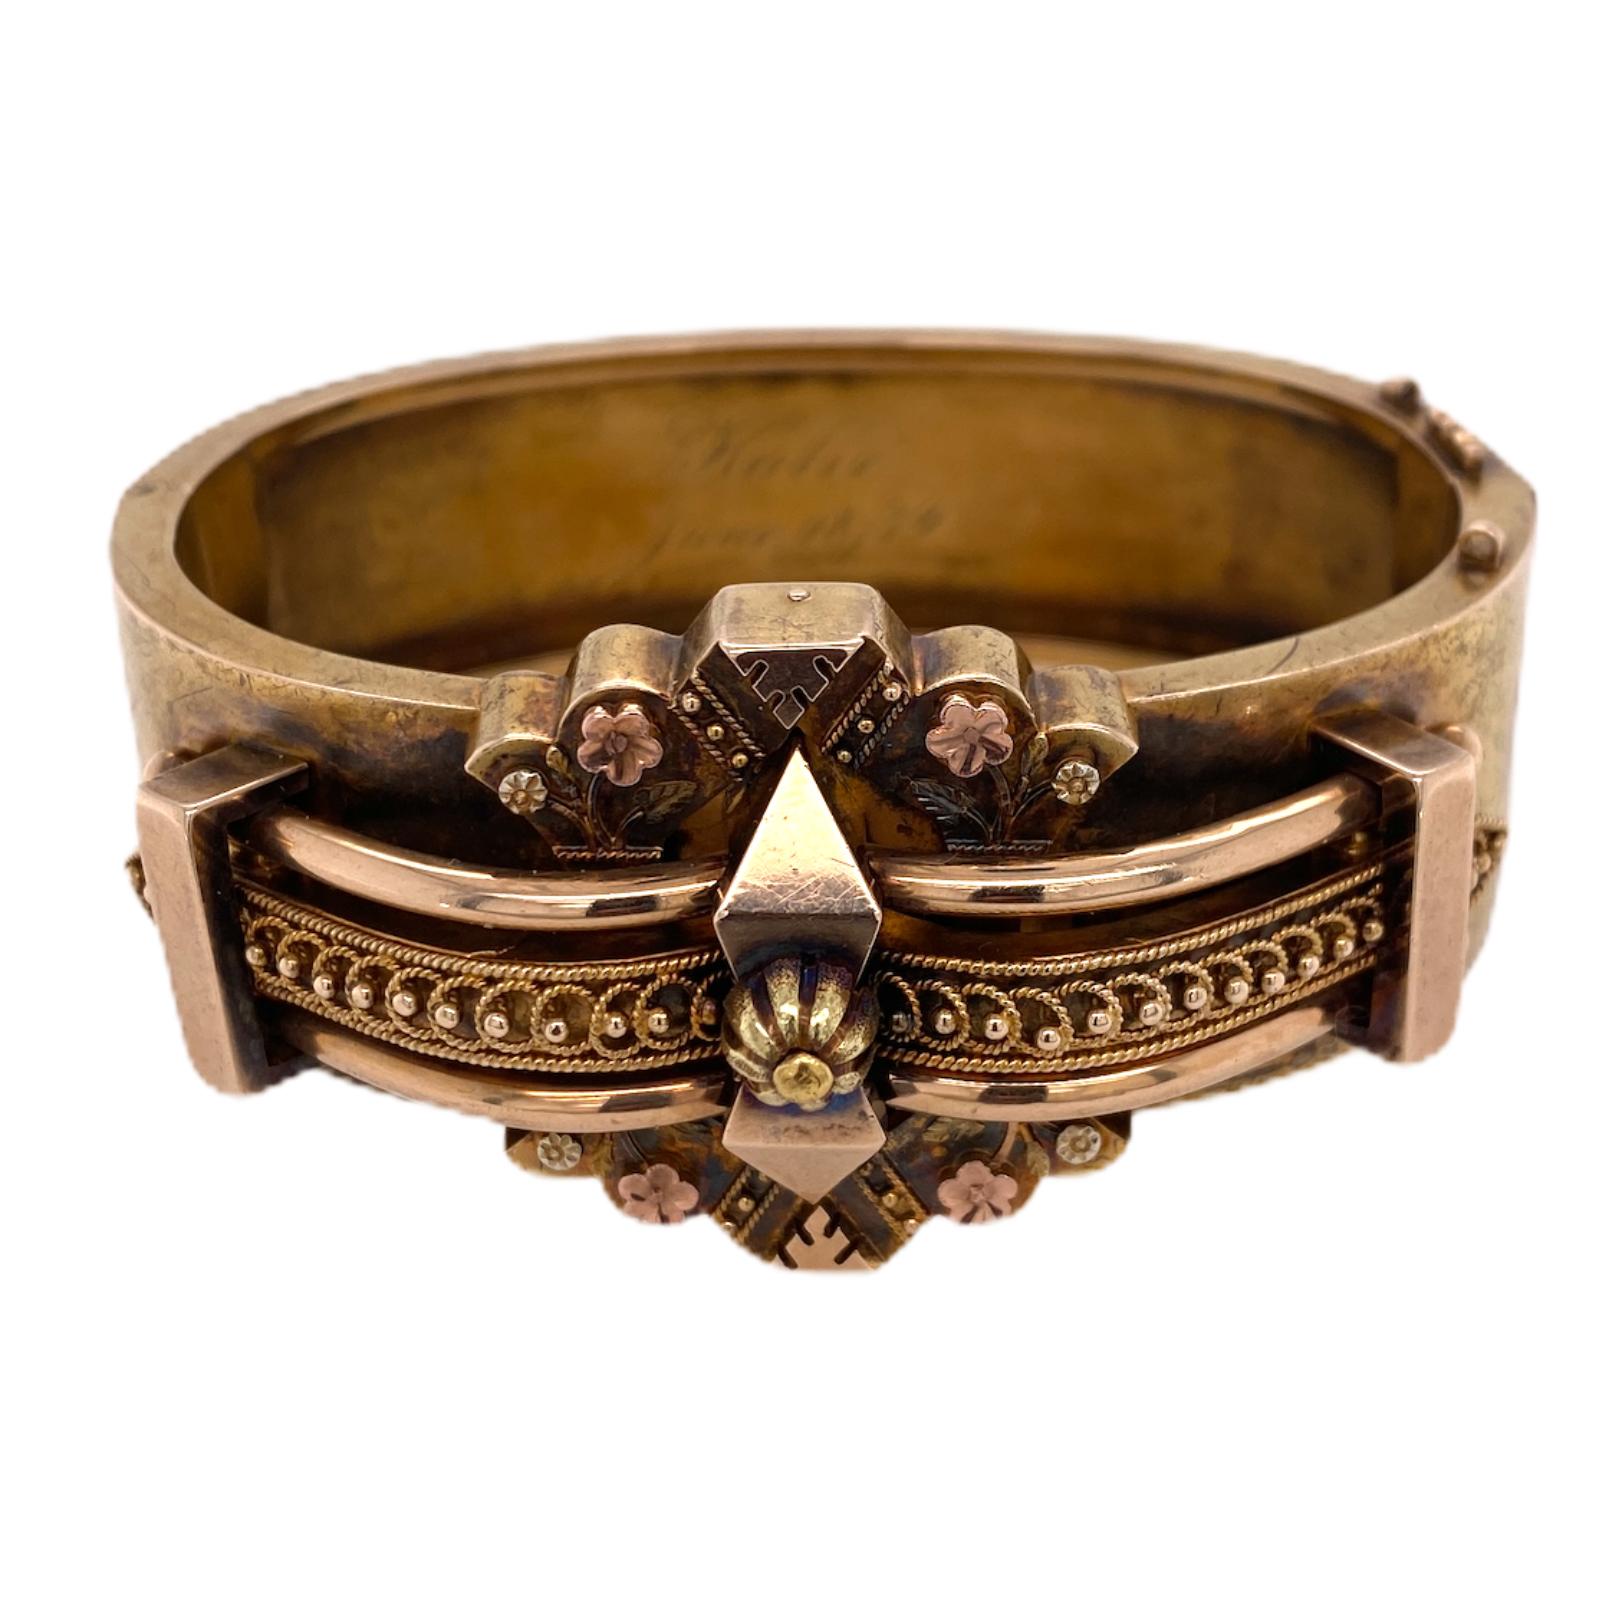 Fabulous original Victorian hinged bangle fashioned in 15 karat yellow gold. The Etruscan style bangle measures 7.0 inches in circumference, 2.25 inches in diameter, and 1.0 inch in width. I have not polished the bangle in order to keep the original